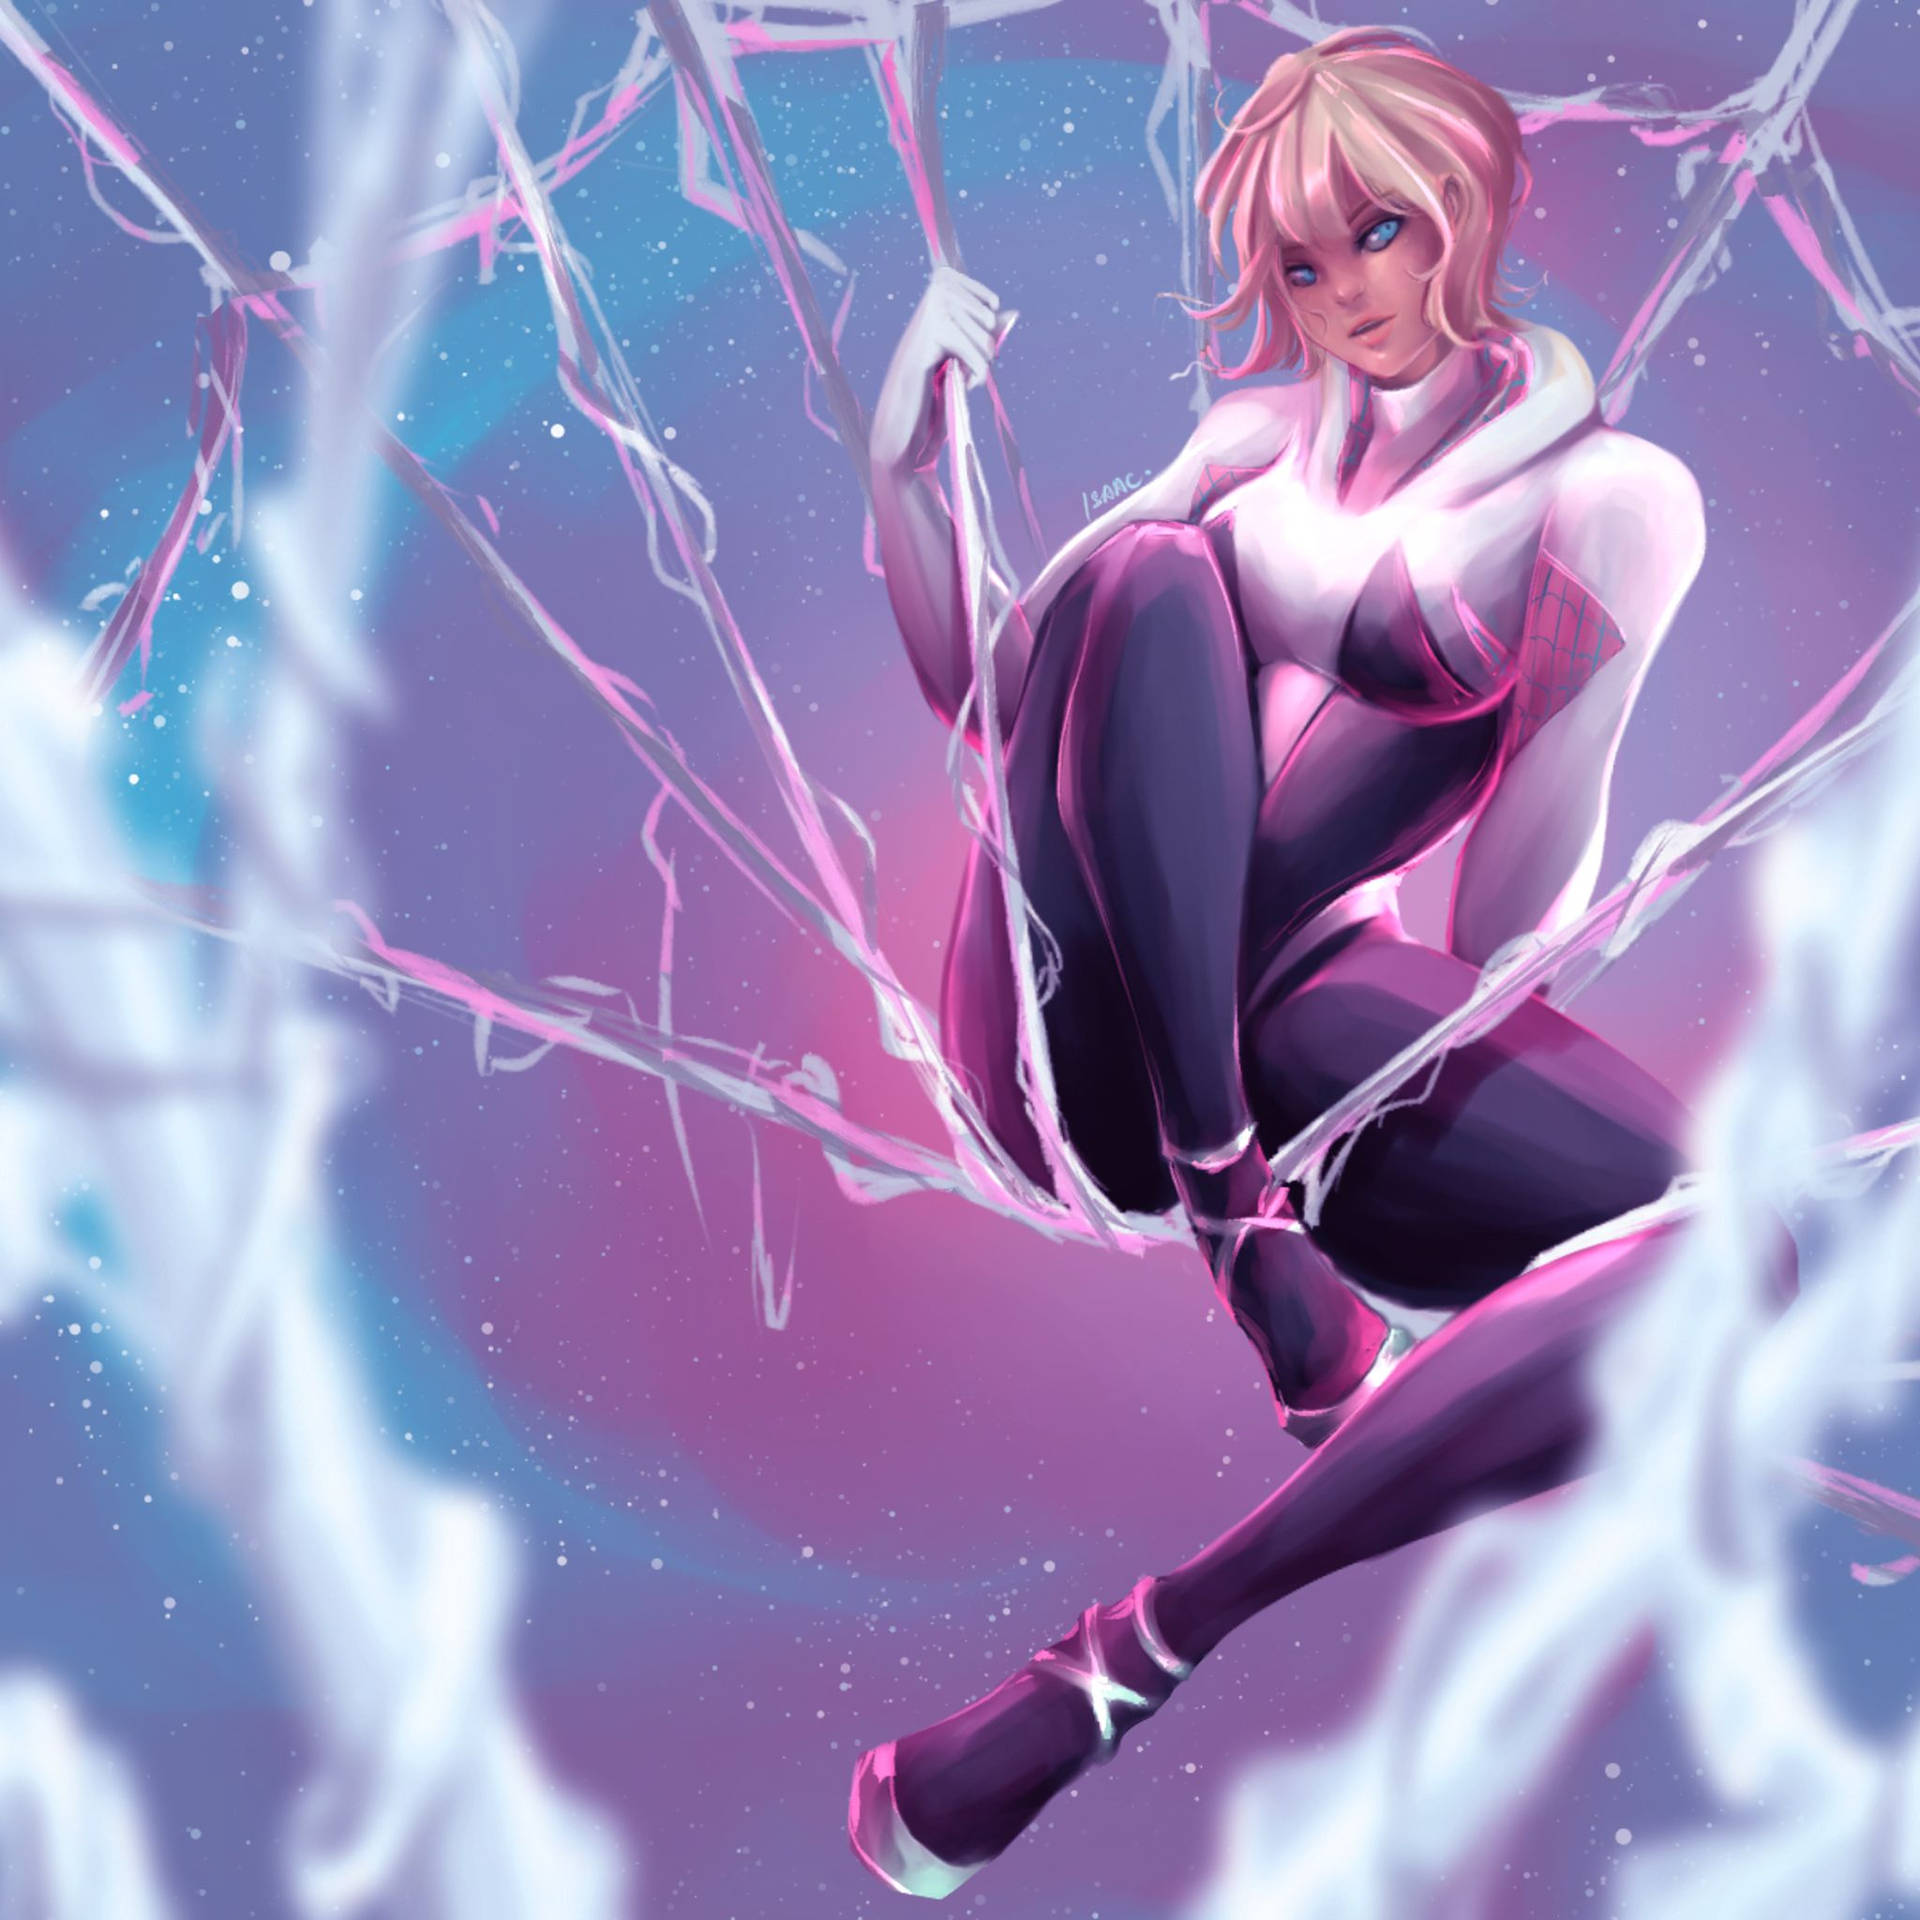 Spider Gwen is swinging through the city! Wallpaper